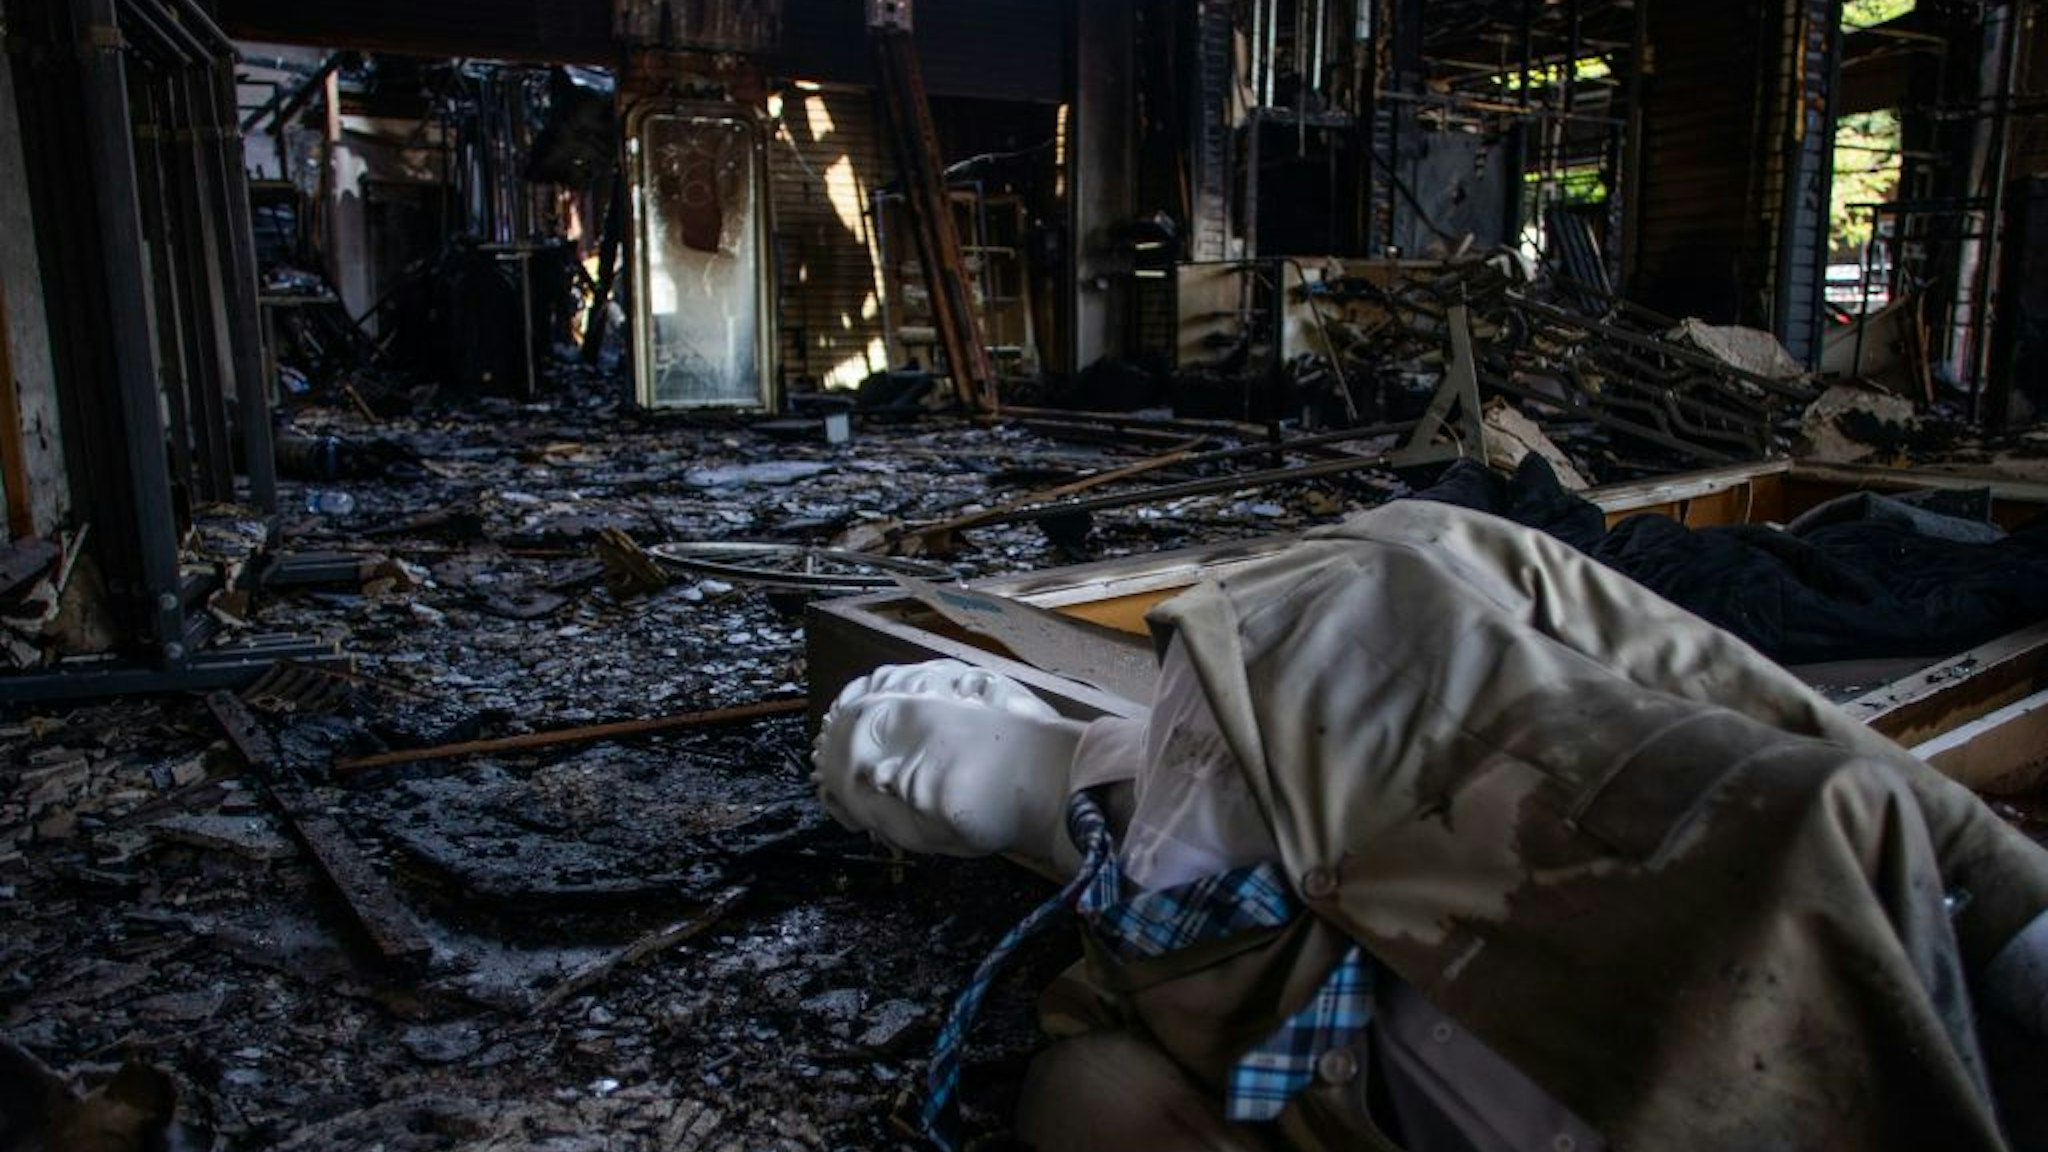 mannequin is seen on the floor of a burned commercial building in Downtown Long Beach, California on Jun